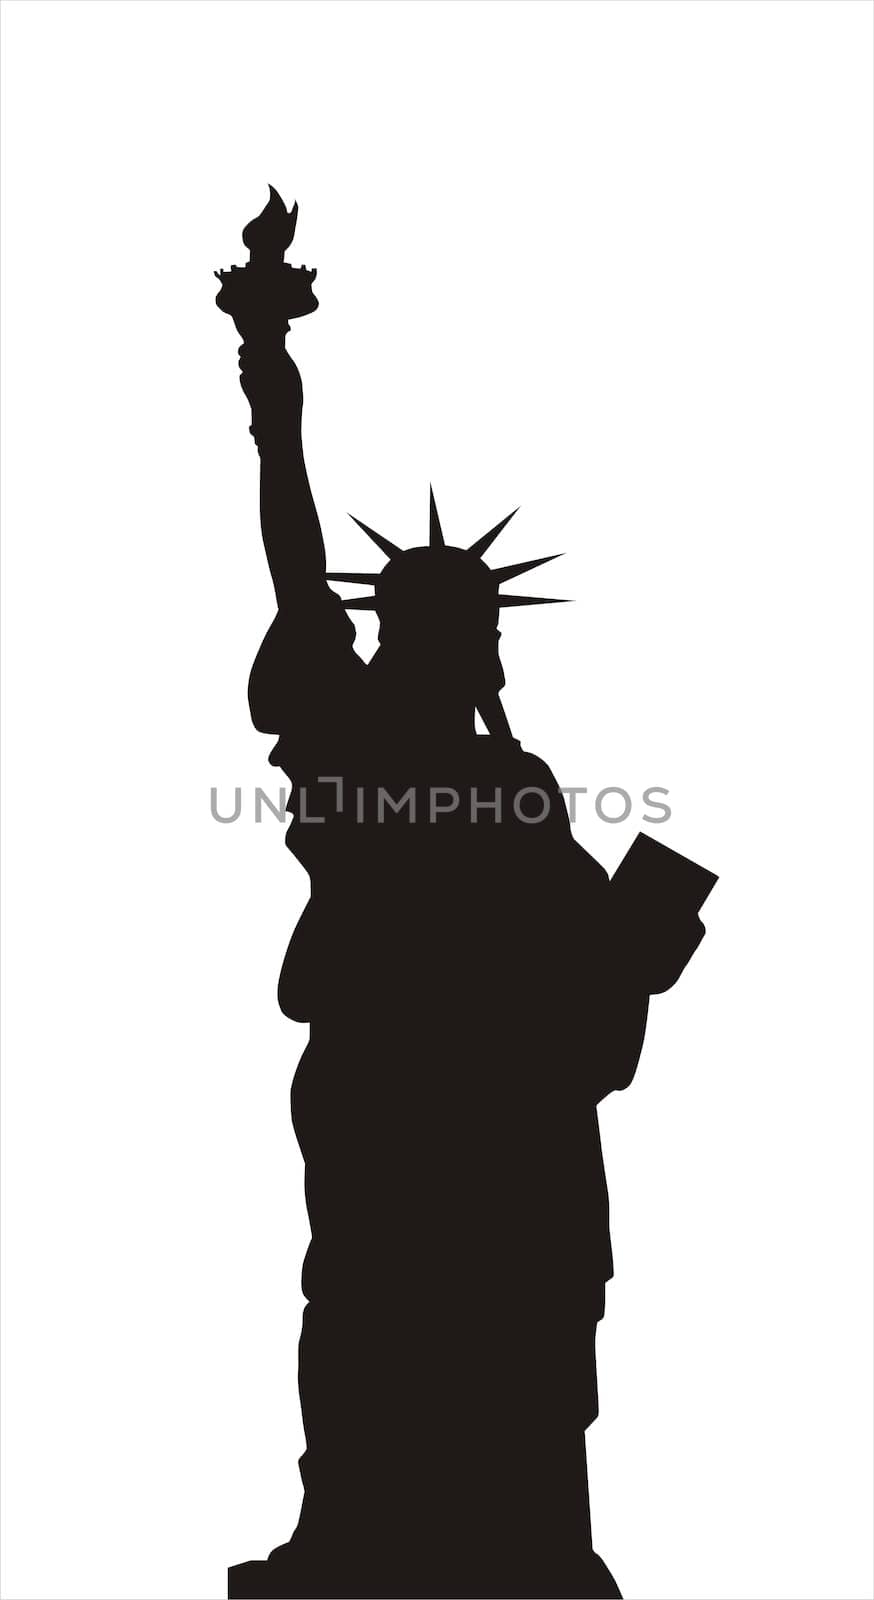 very big size statue of liberty black silhouette illustration